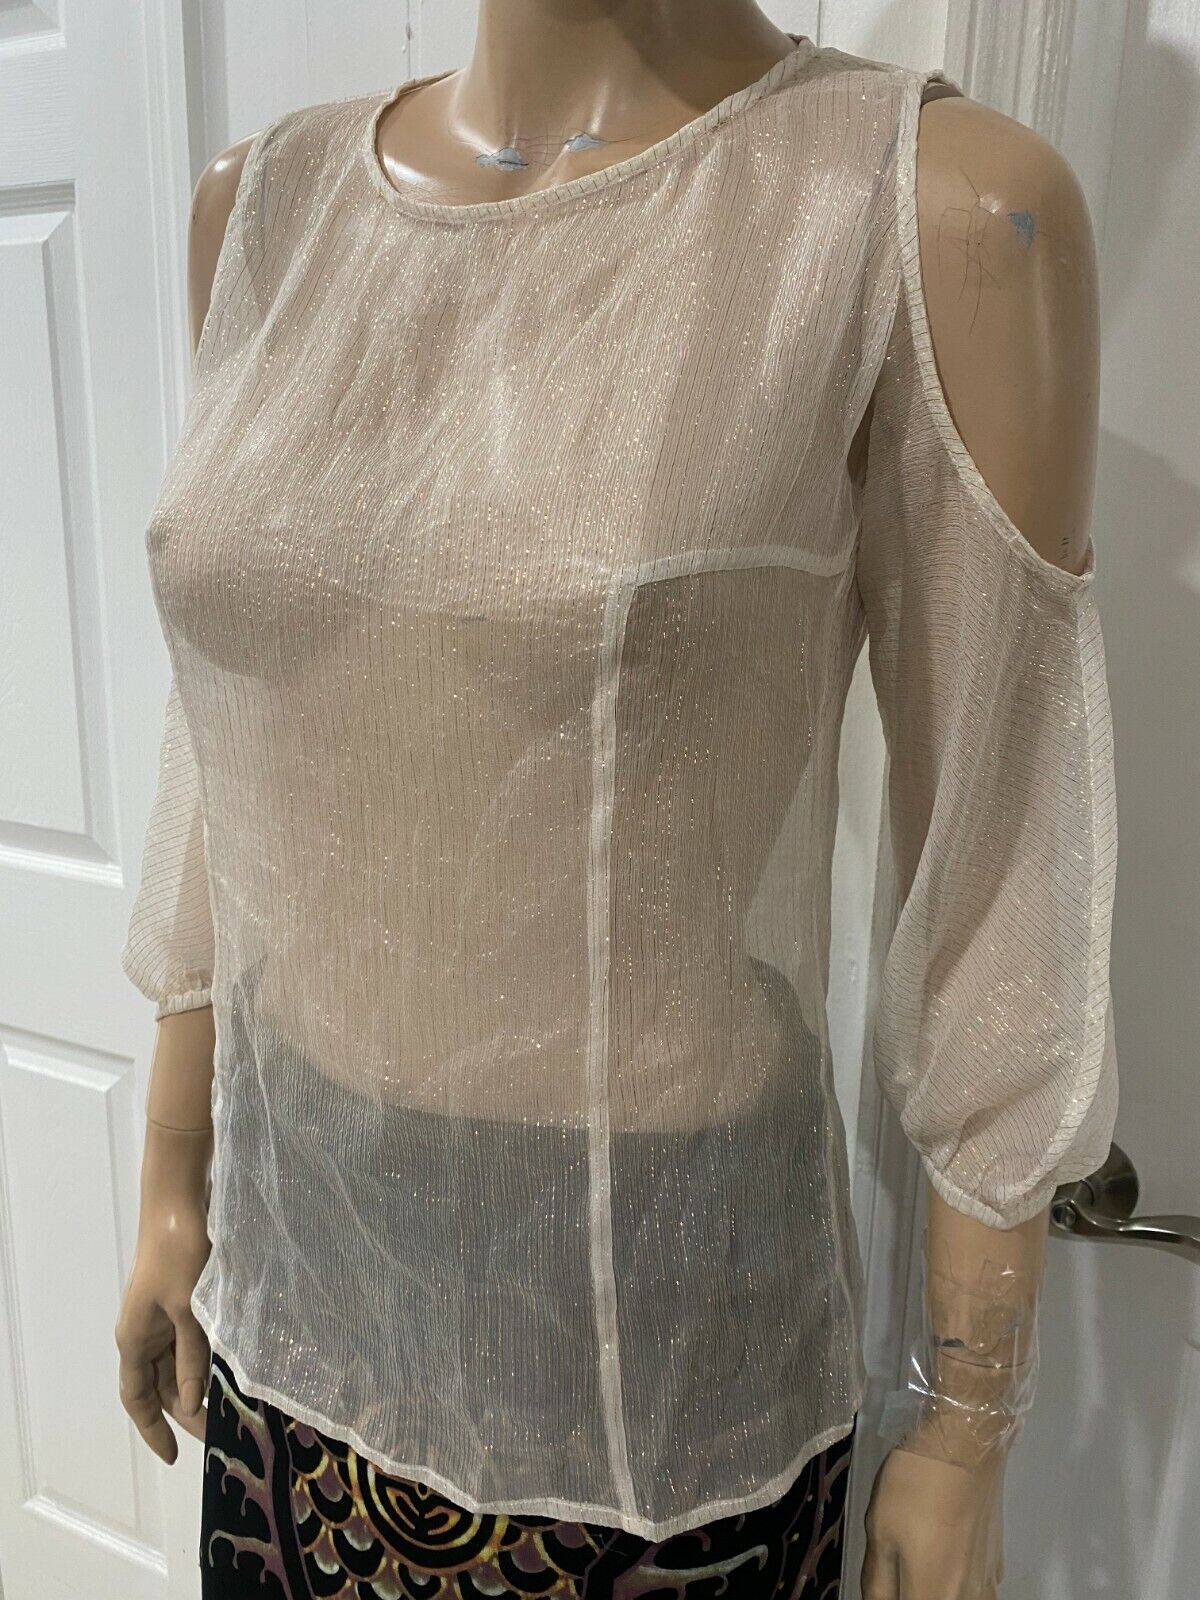 abdallah kasawneh recommends See Through Blouse Pics